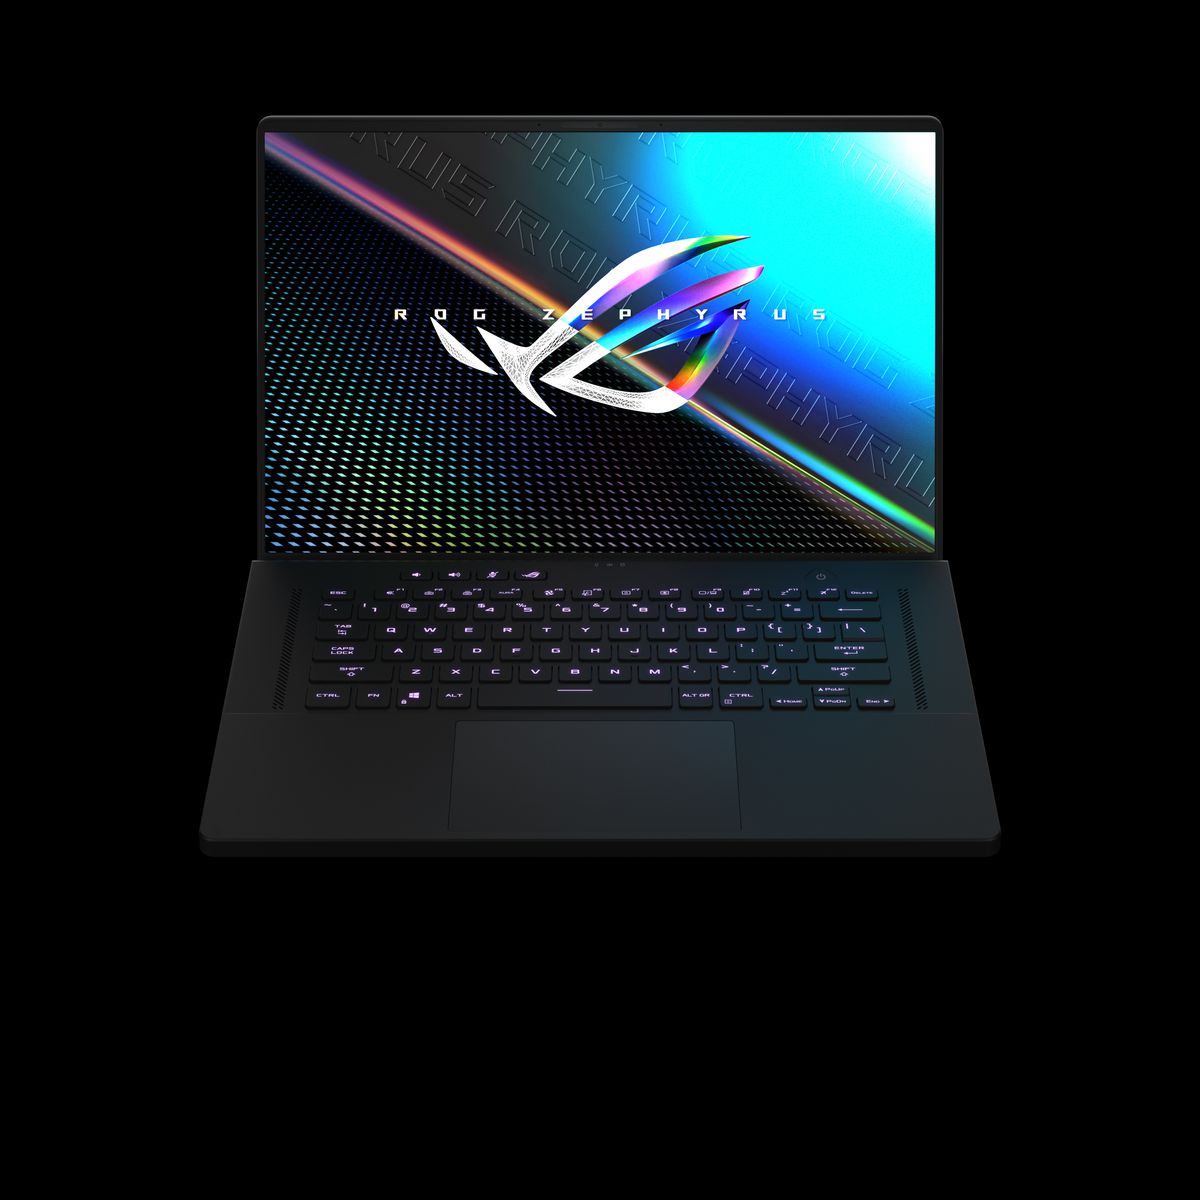 The Asus ROG Zephyrus M16 open, seen from above. The screen displays the ROG logo.